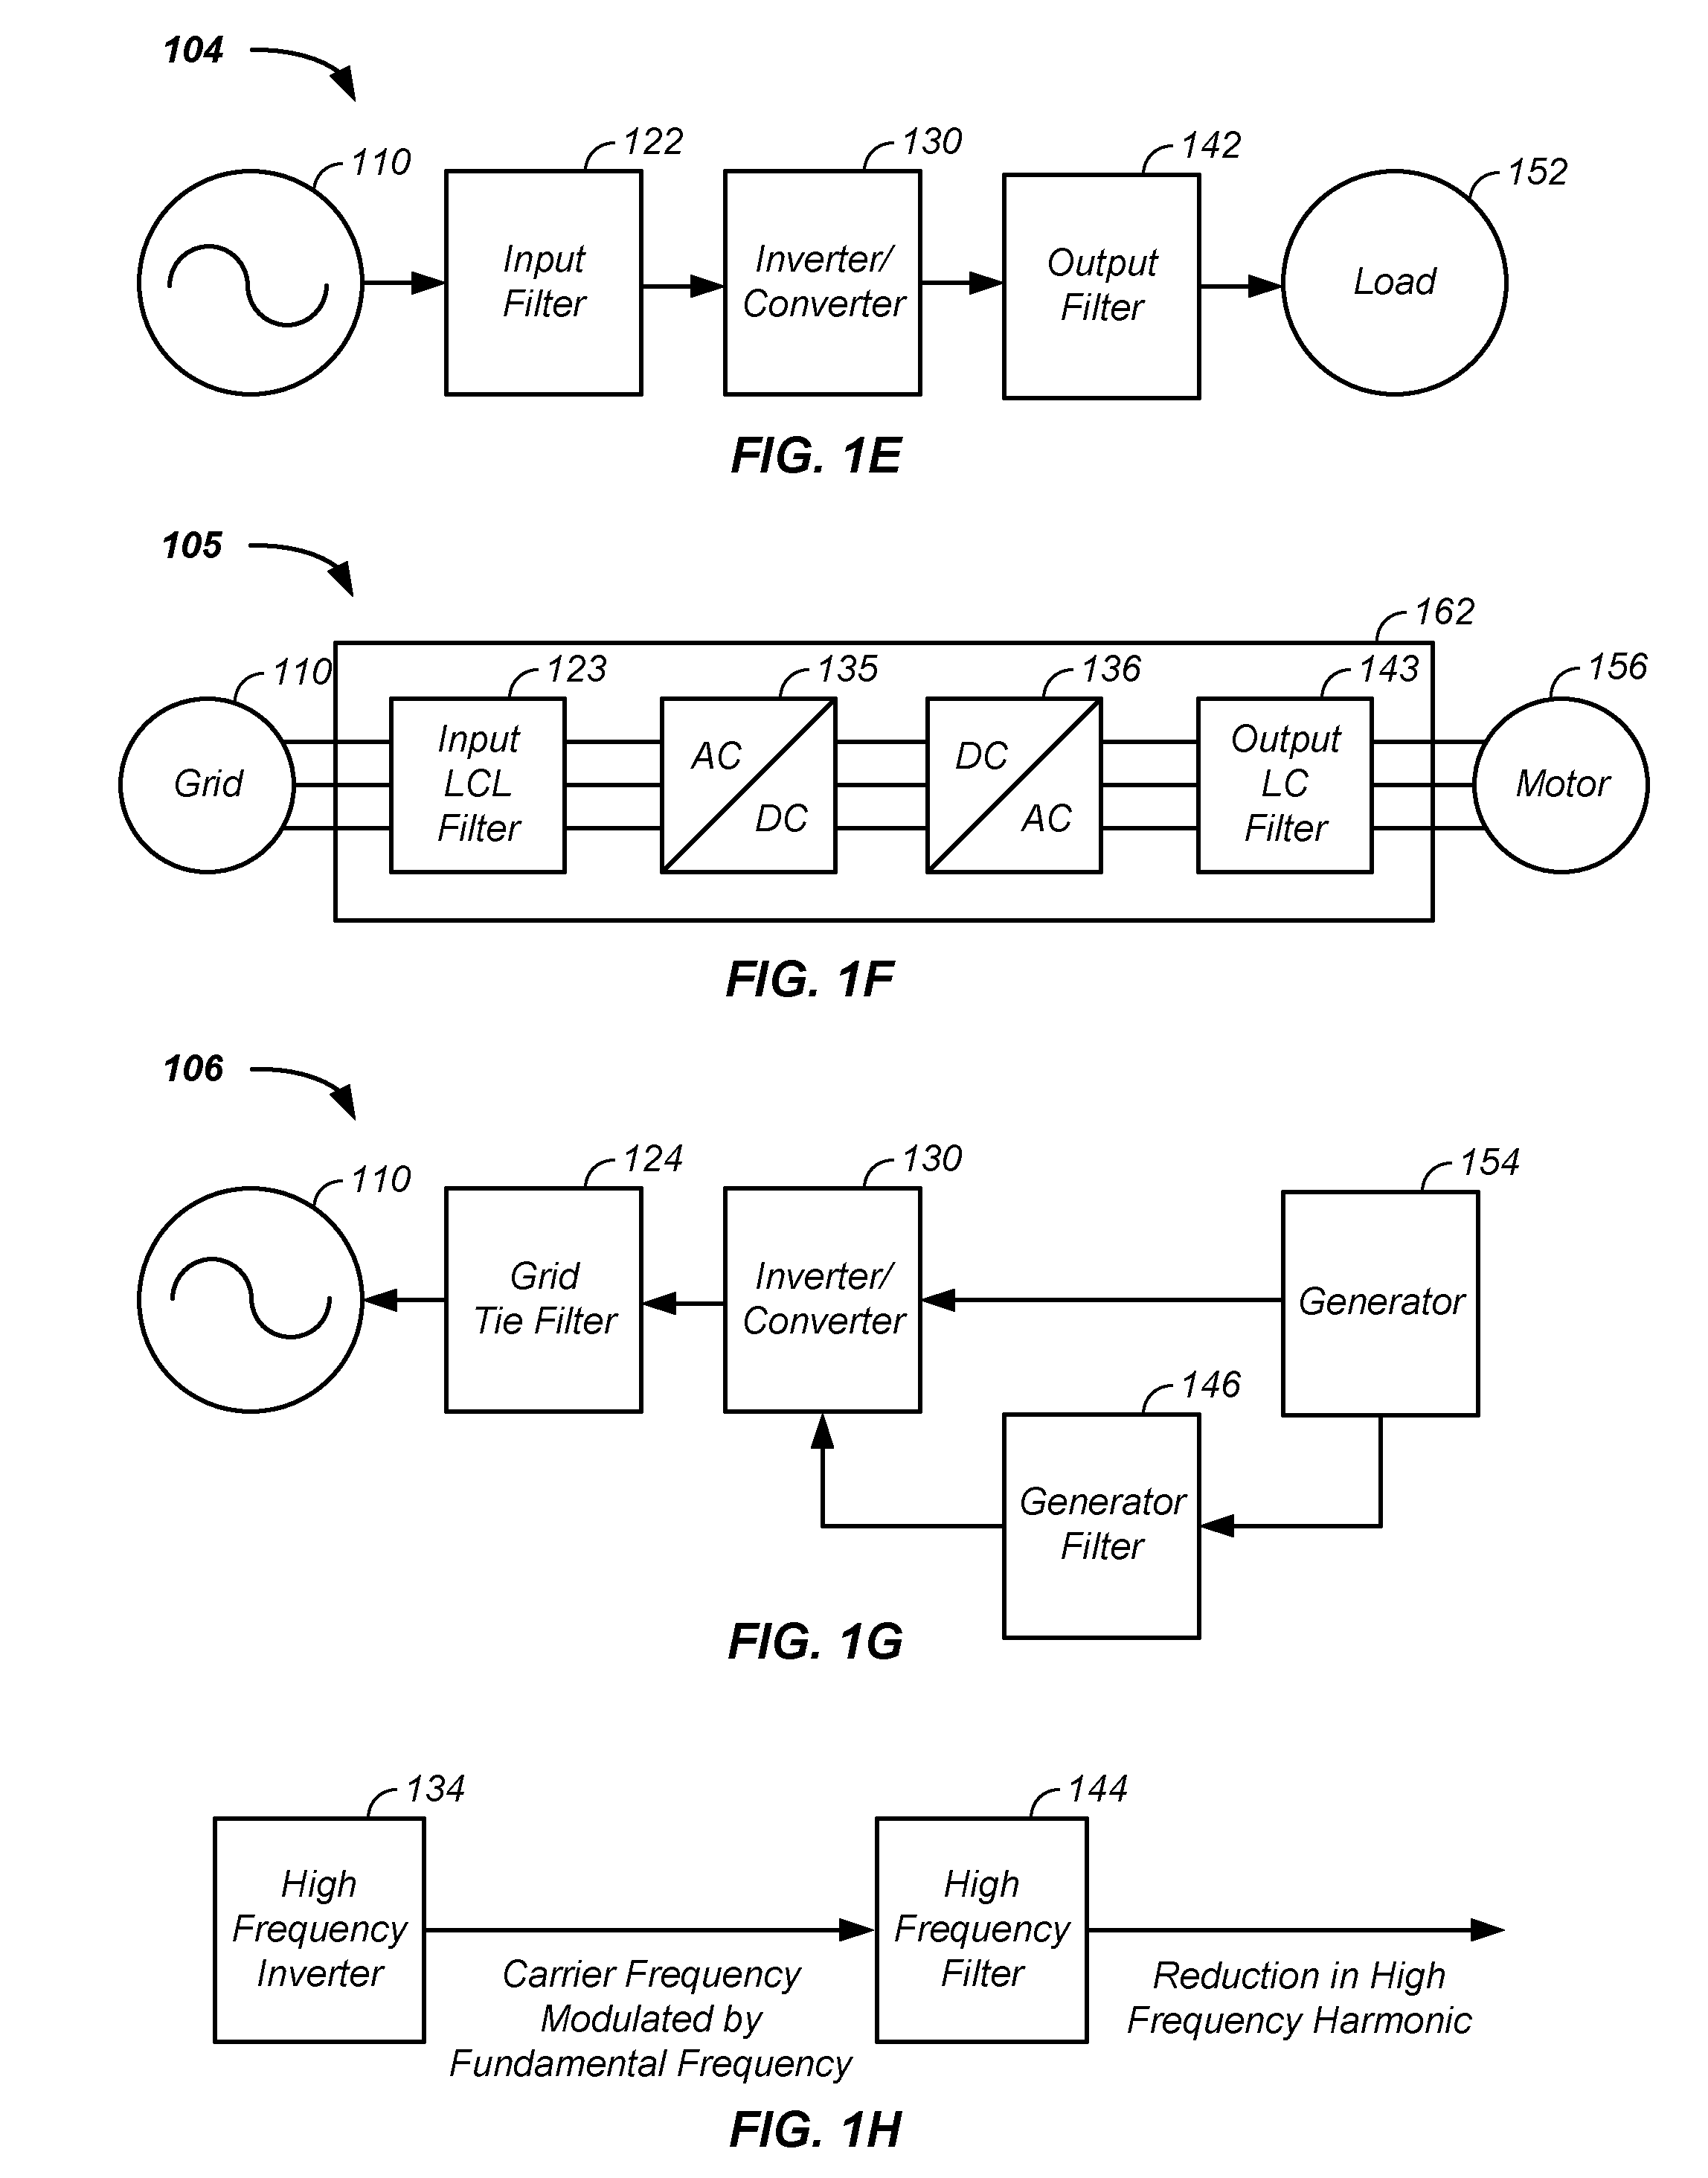 High frequency inverter/distributed gap inductor-capacitor filter apparatus and method of use thereof